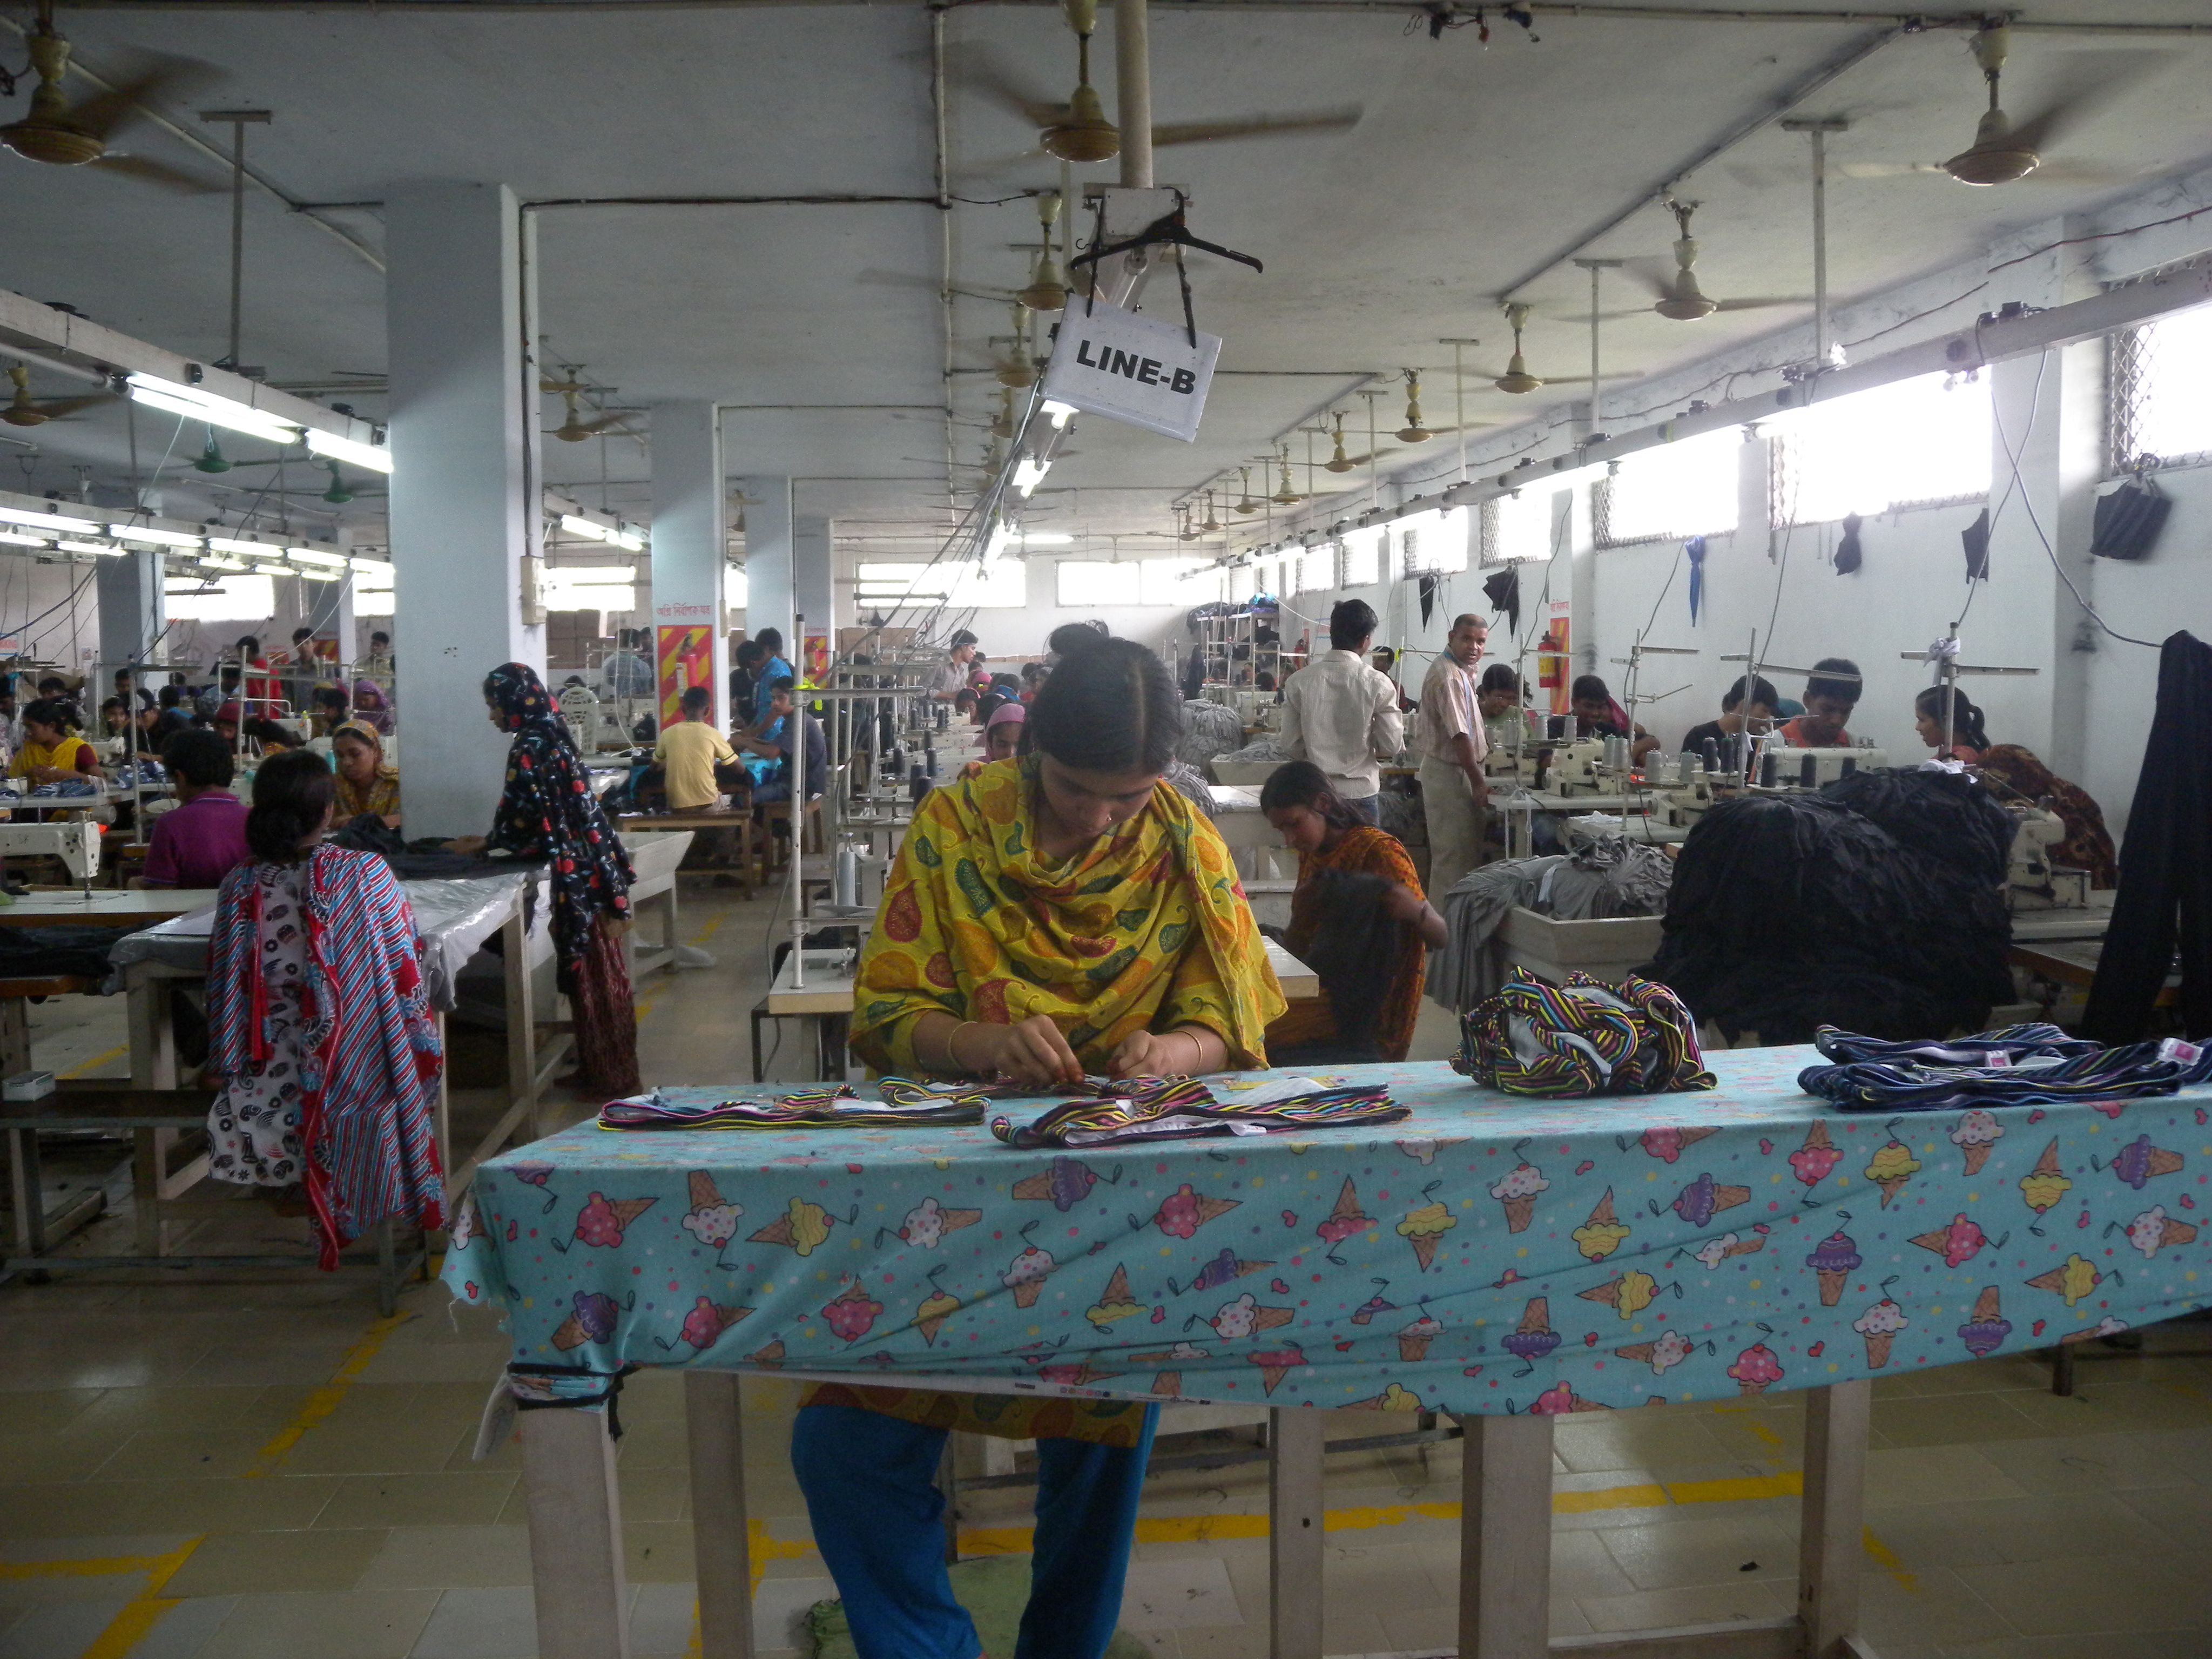 The markets need transforming. Since the pandemic began, many garment workers have faced job losses and gone hungry.